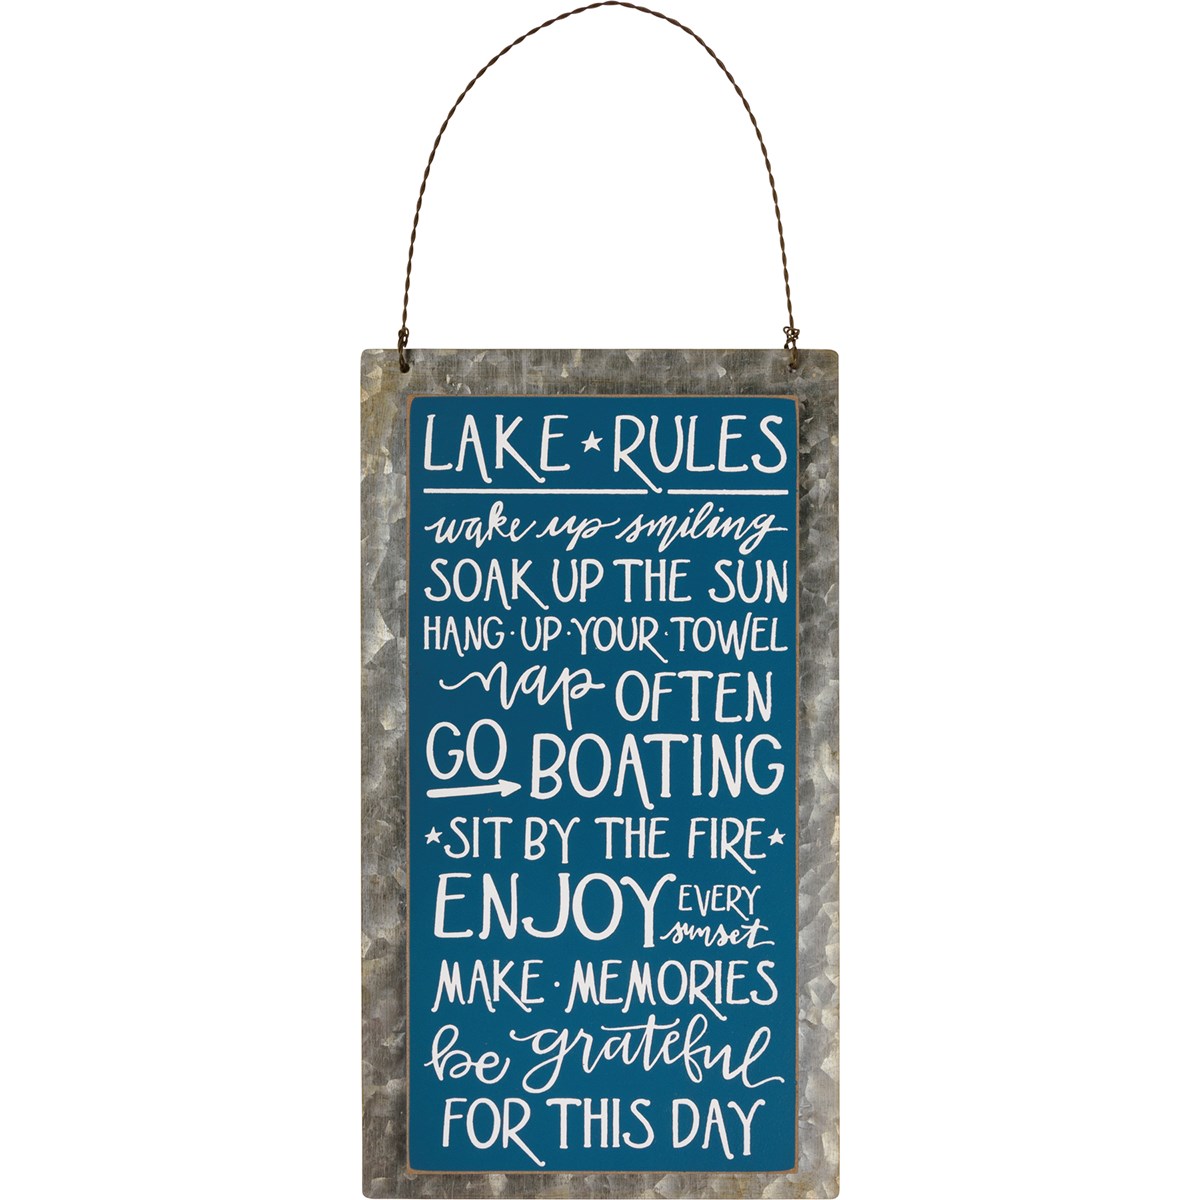 Hanging Decor - Lake Rules - 5.25" x 9.50" x 0.25" - Wood, Metal, Wire